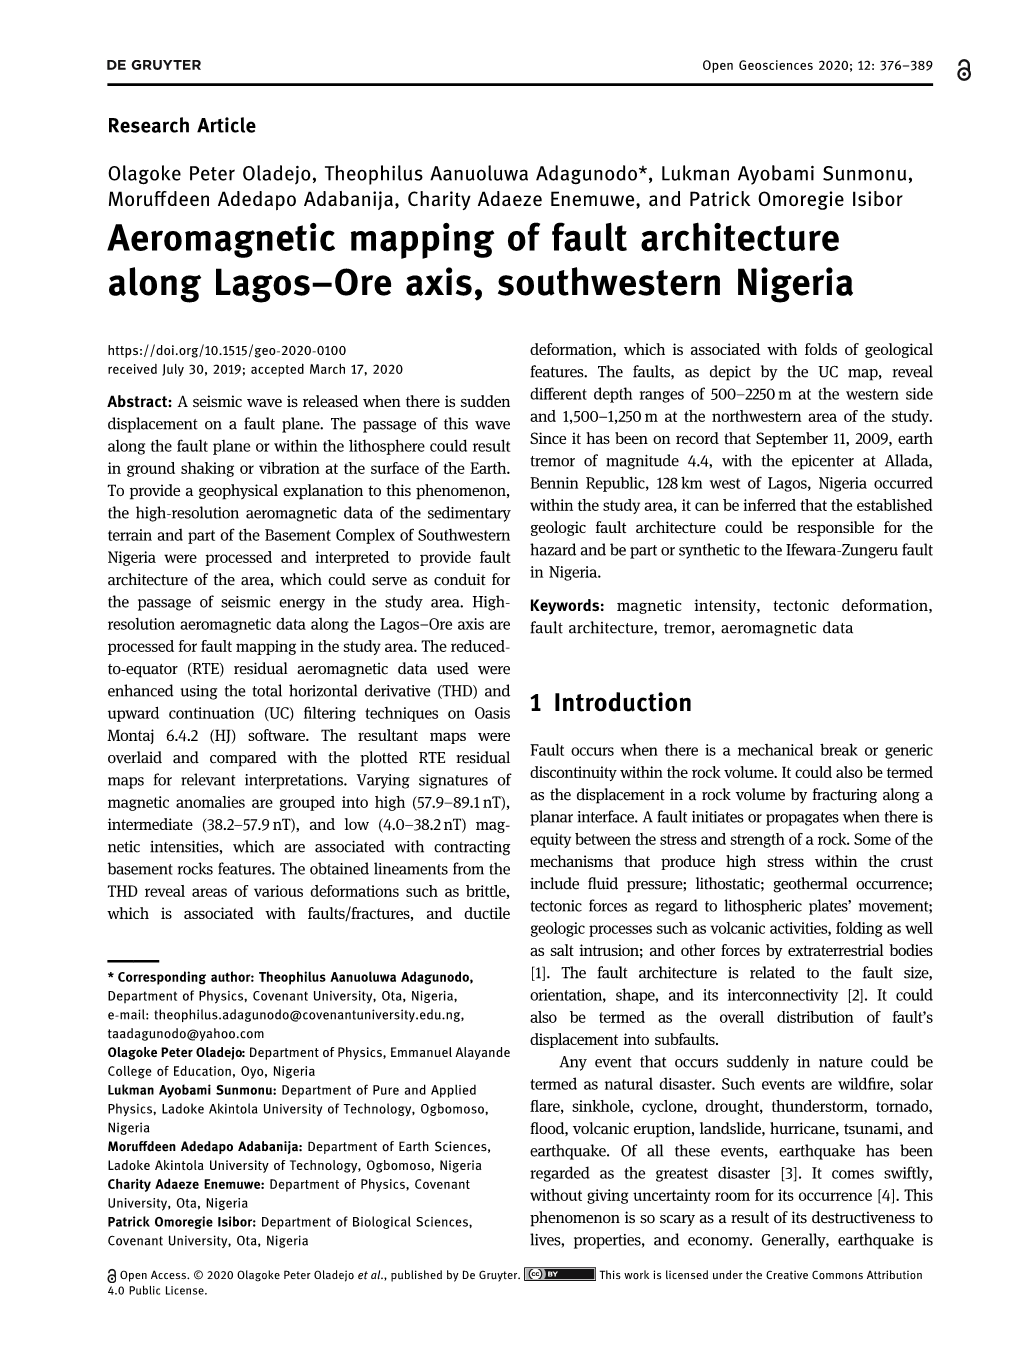 Aeromagnetic Mapping of Fault Architecture Along Lagos–Ore Axis, Southwestern Nigeria